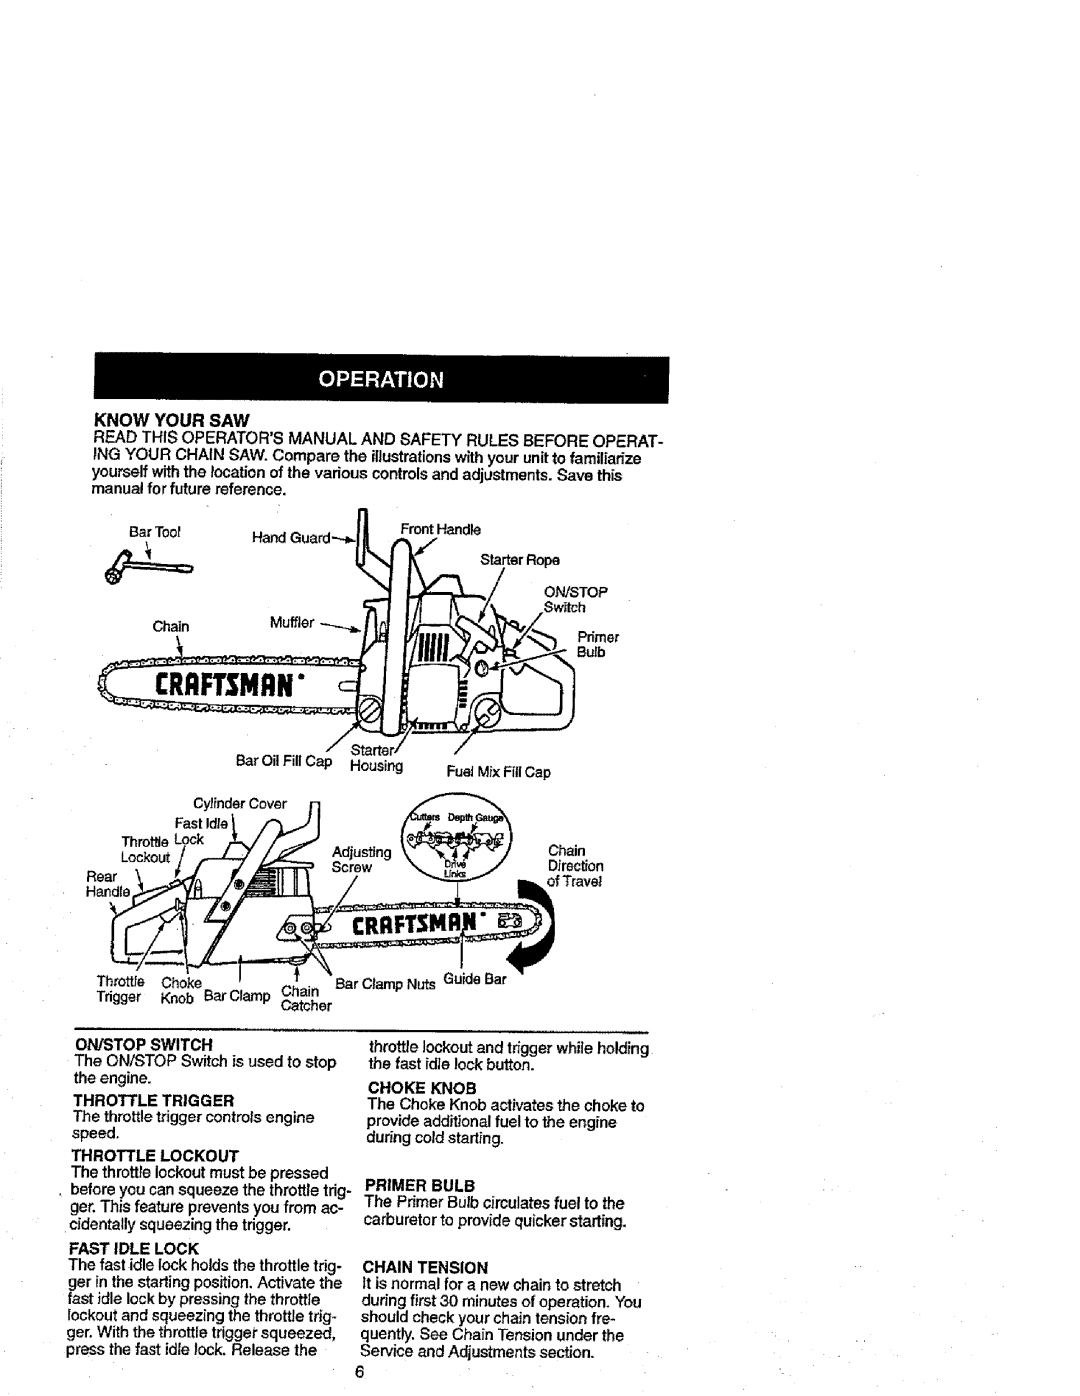 Craftsman 358.352680 - 18 IN. BAR manual S .or.ope, t I.,I, _._ switch 